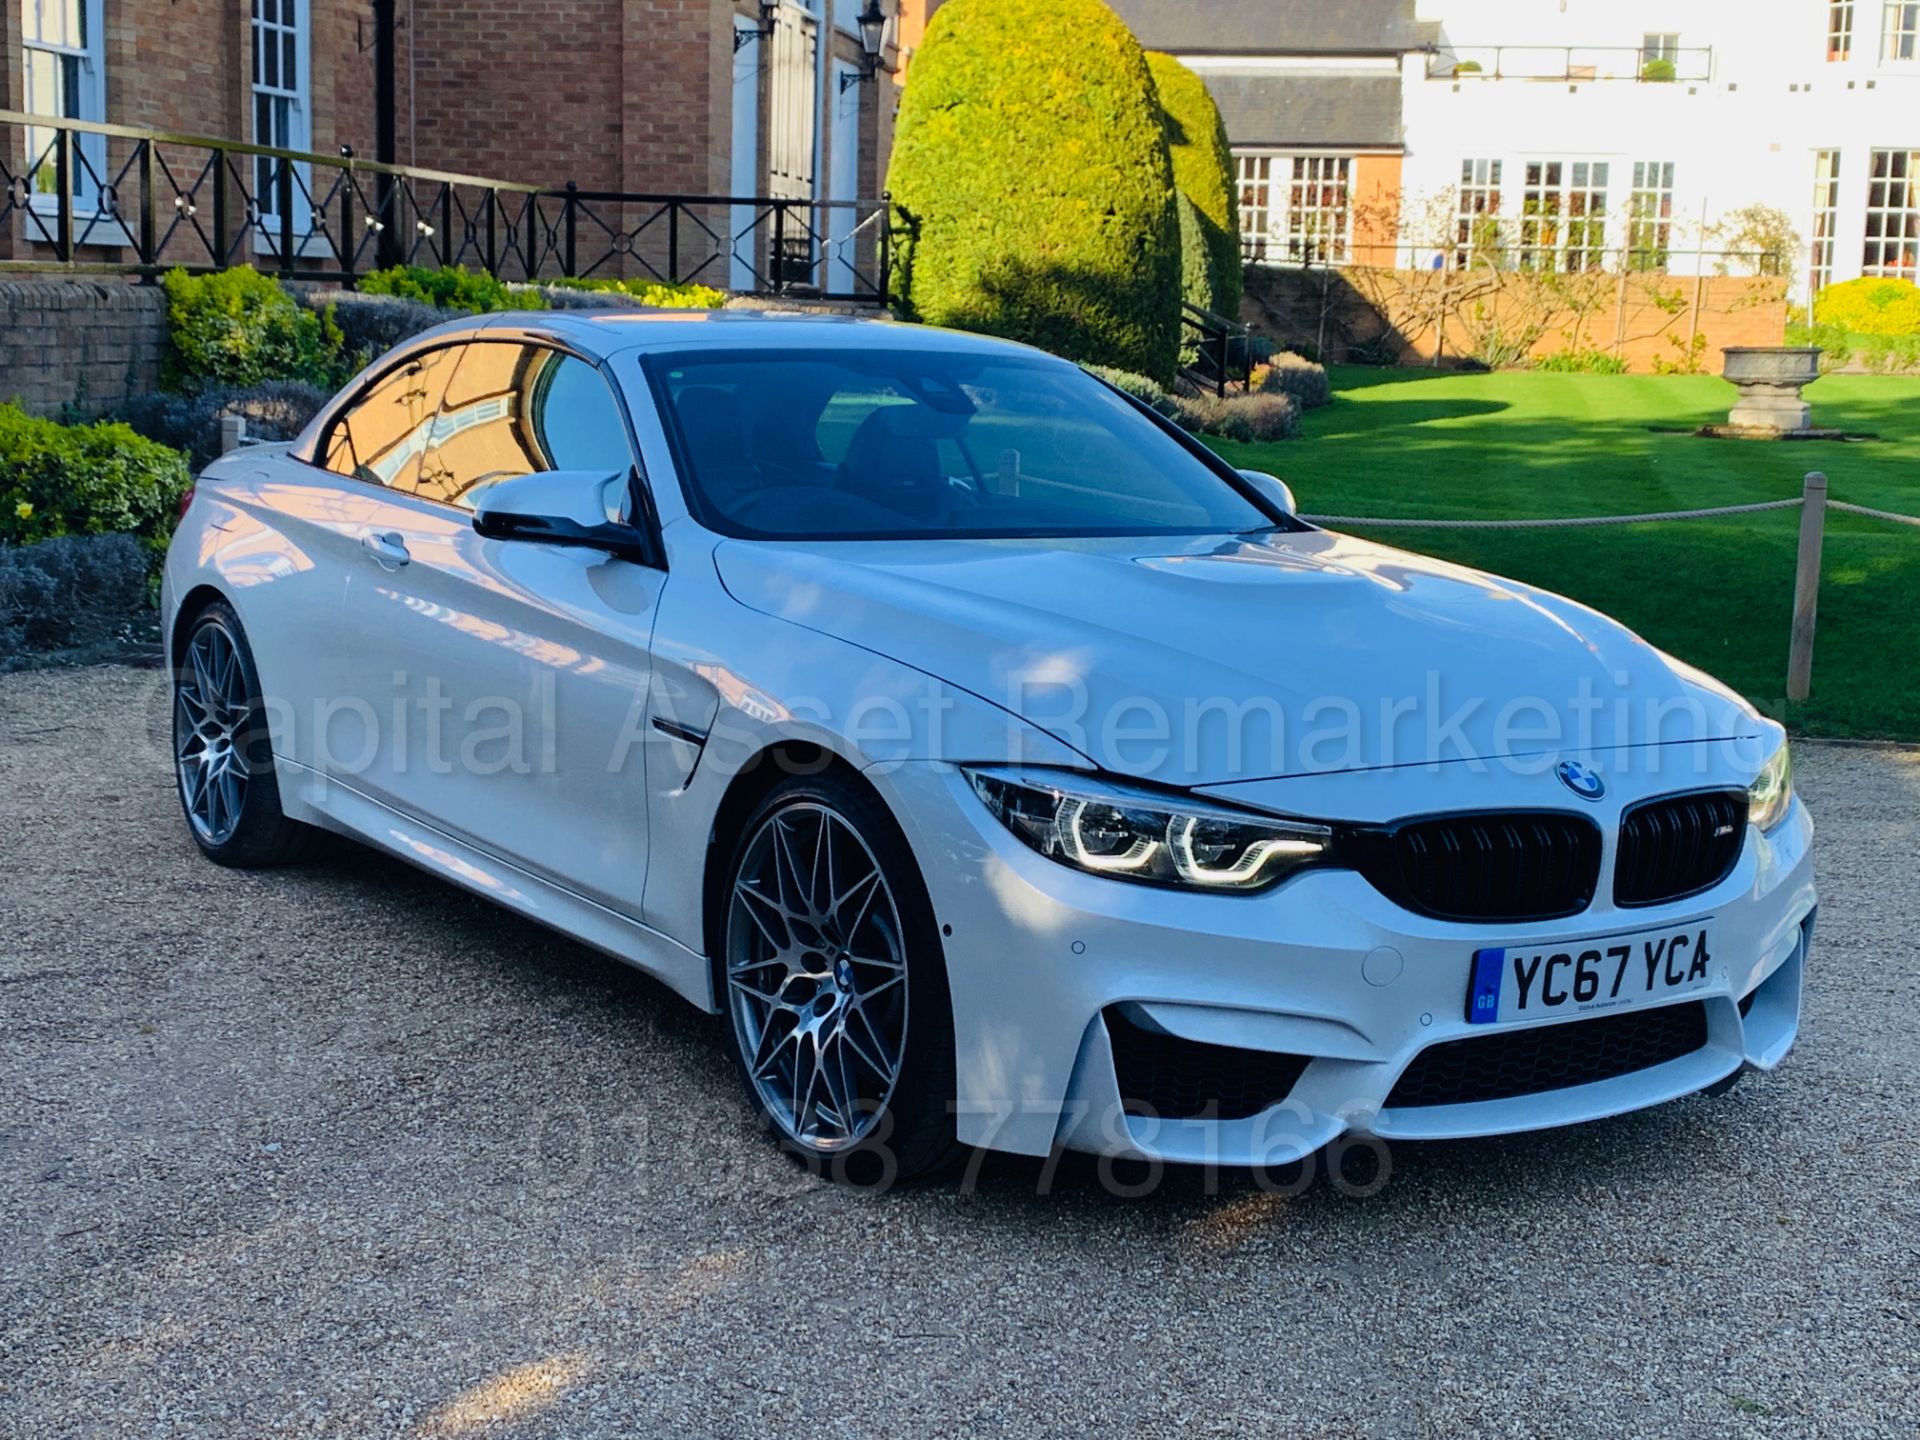 ON SALE BMW M4 CONVERTIBLE *COMPETITION PACKAGE* (2018 MODEL) '431 BHP - M DCT AUTO' WOW!!!!! - Image 22 of 89